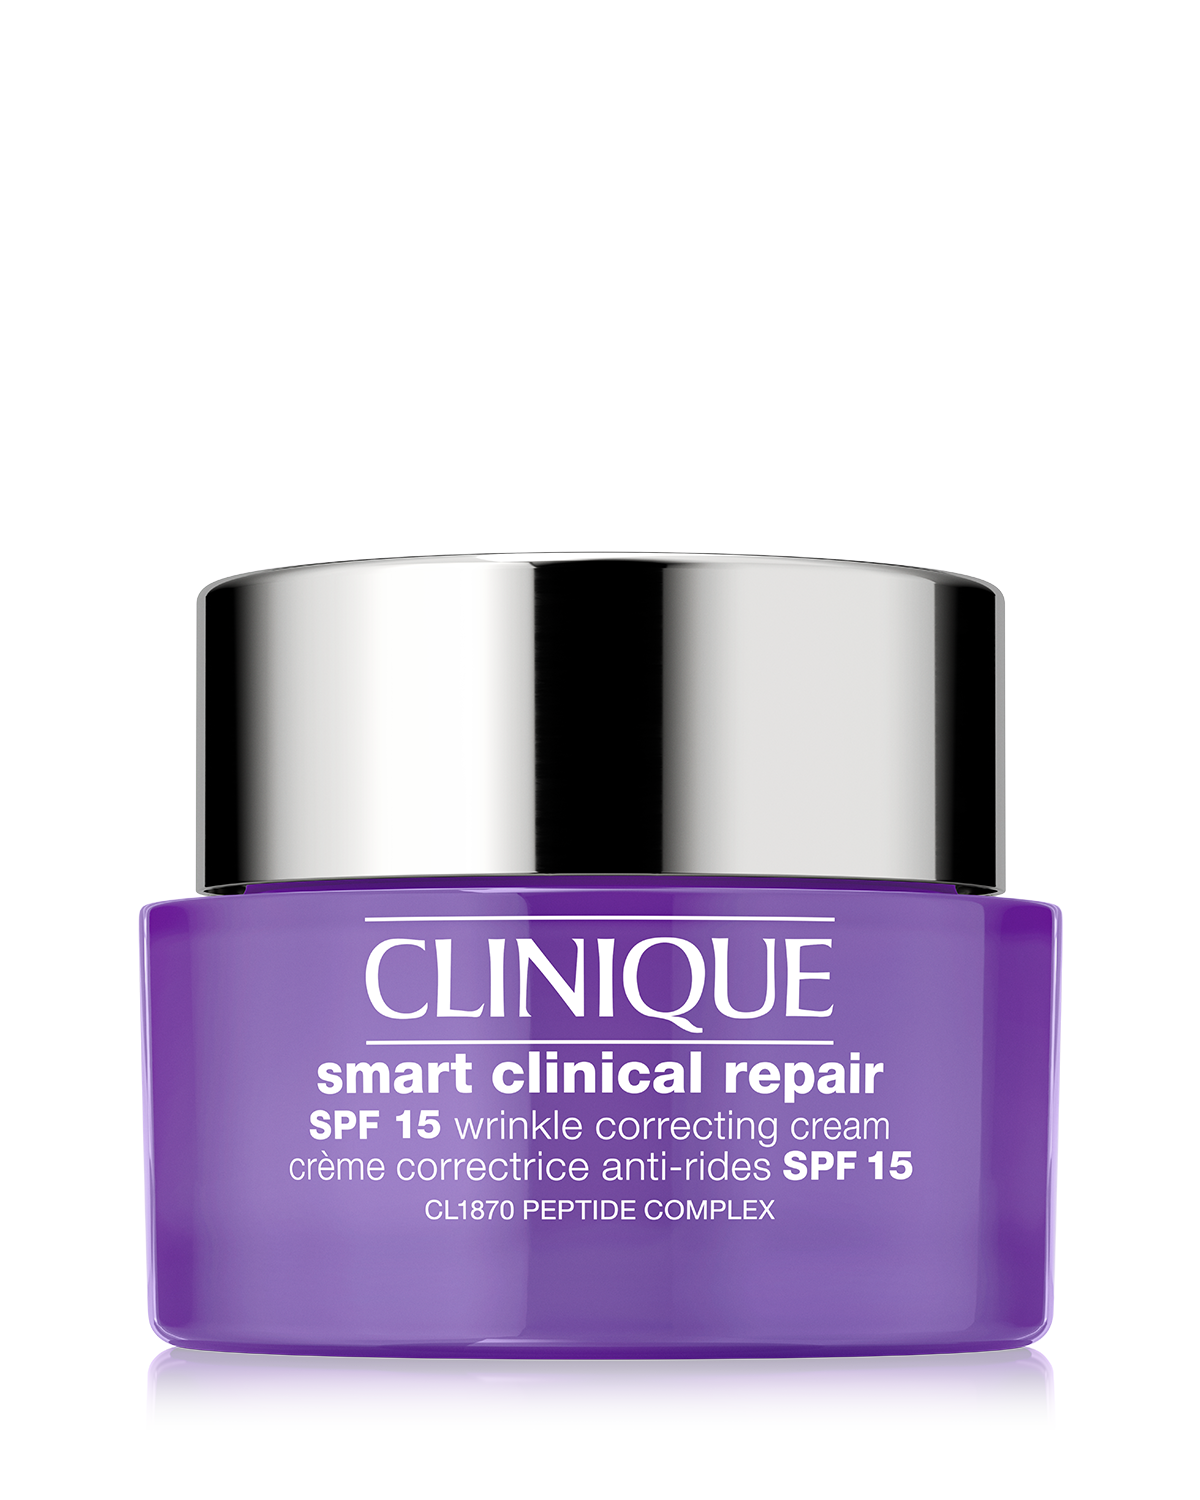 Clinique Smart Clinical Repair SPF 15 Wrinkle Correcting Cream